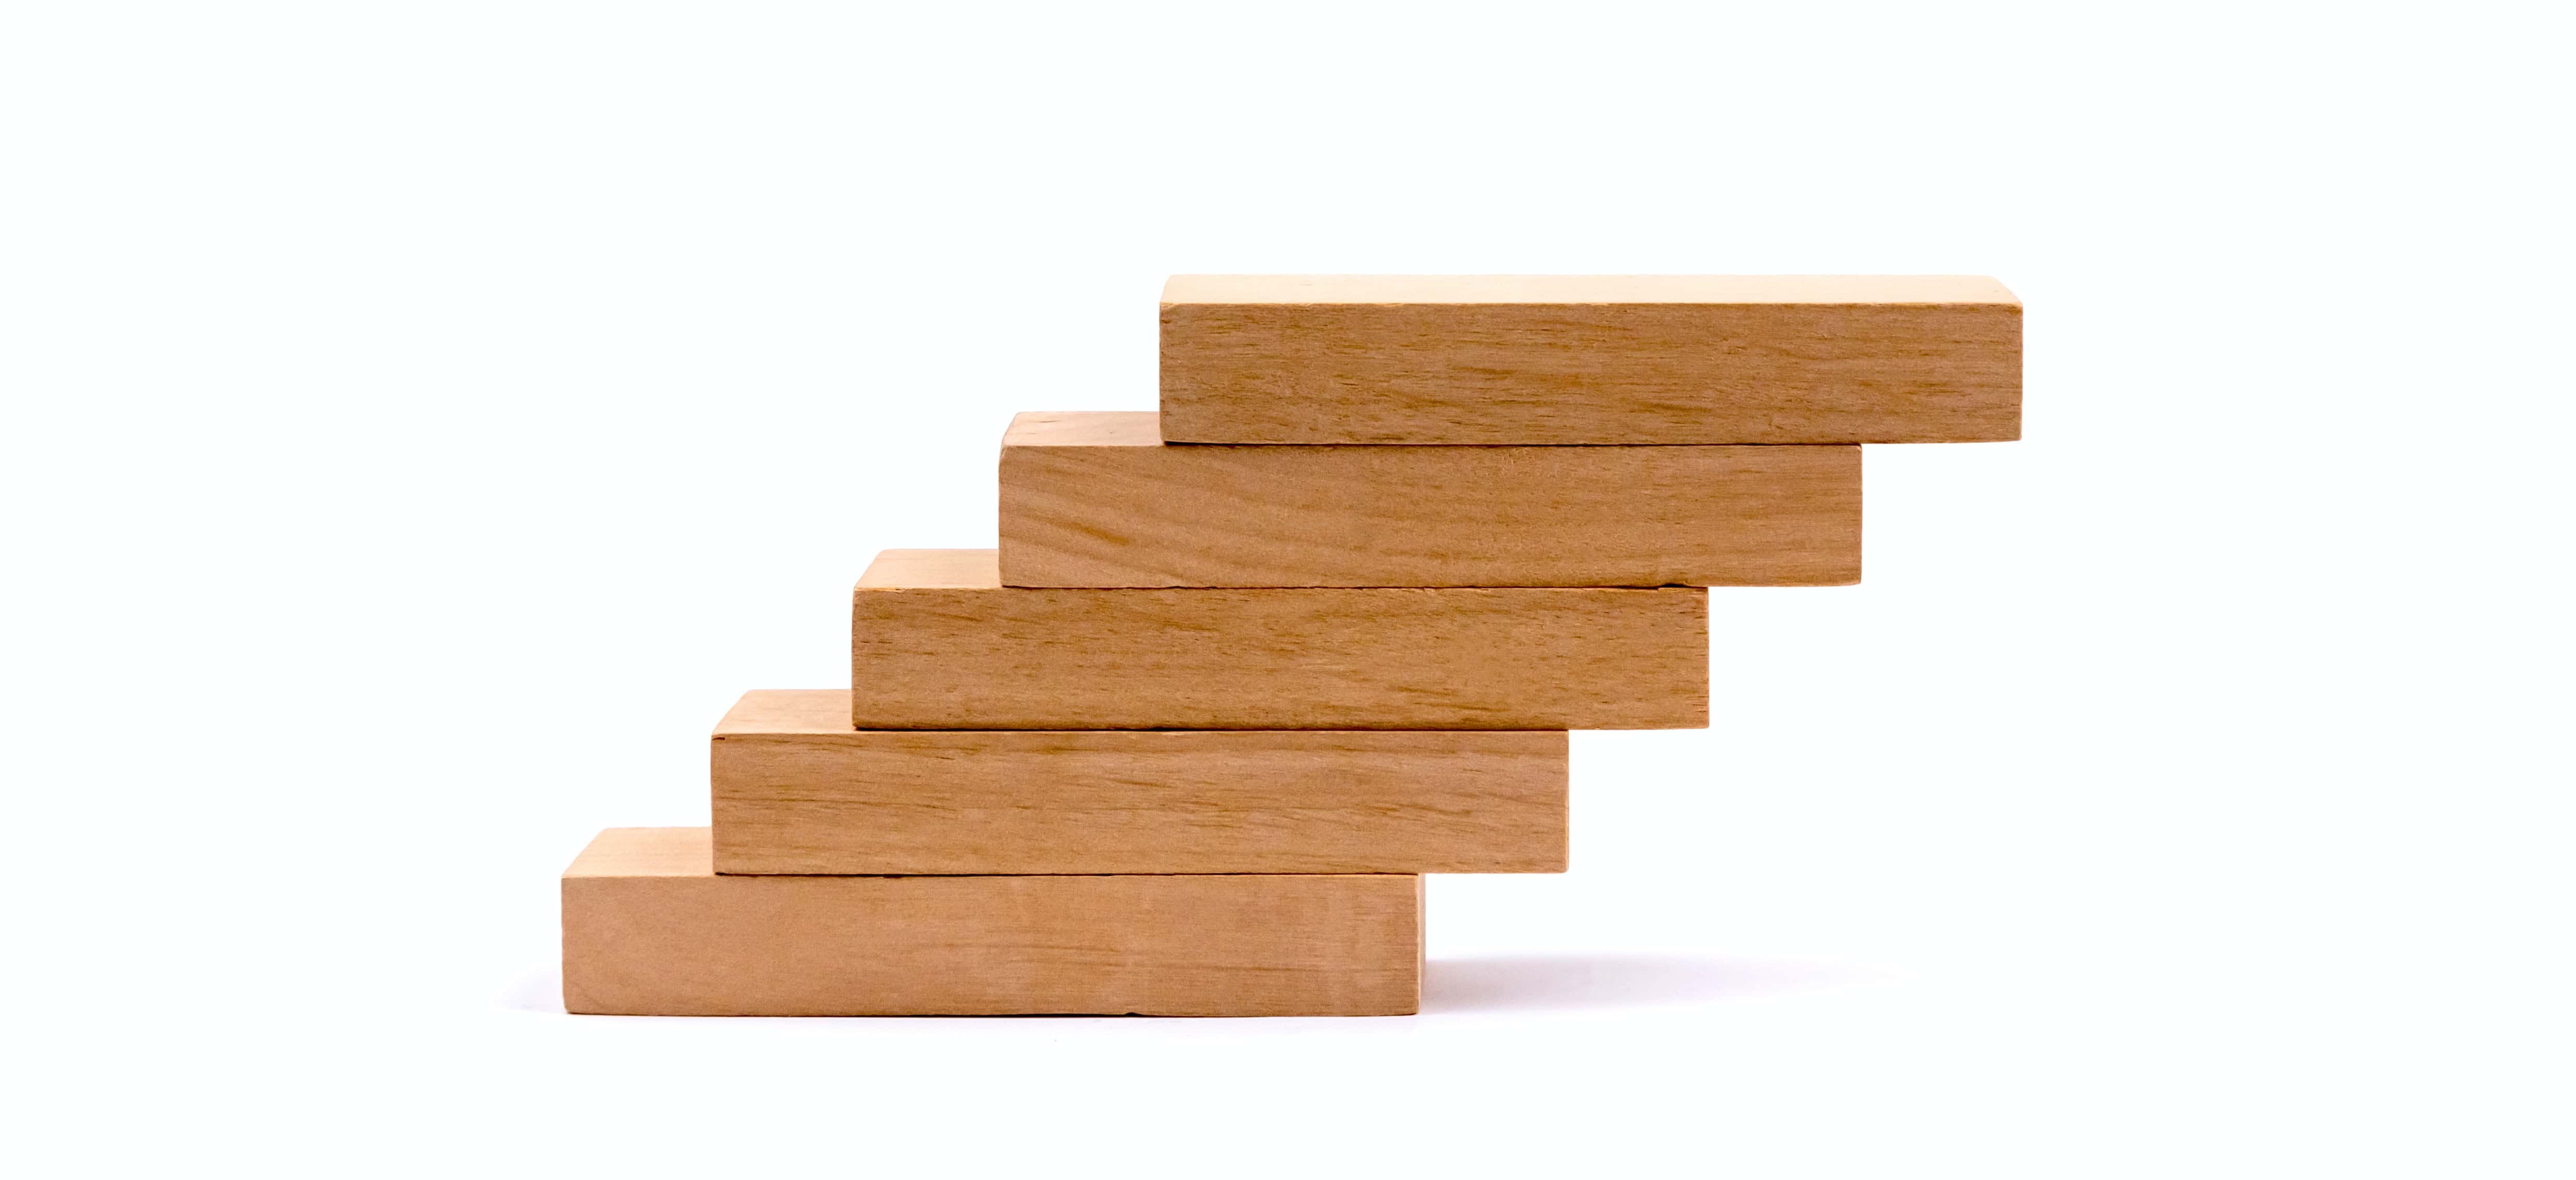 wooden blocks stacked up and right in a graph formation